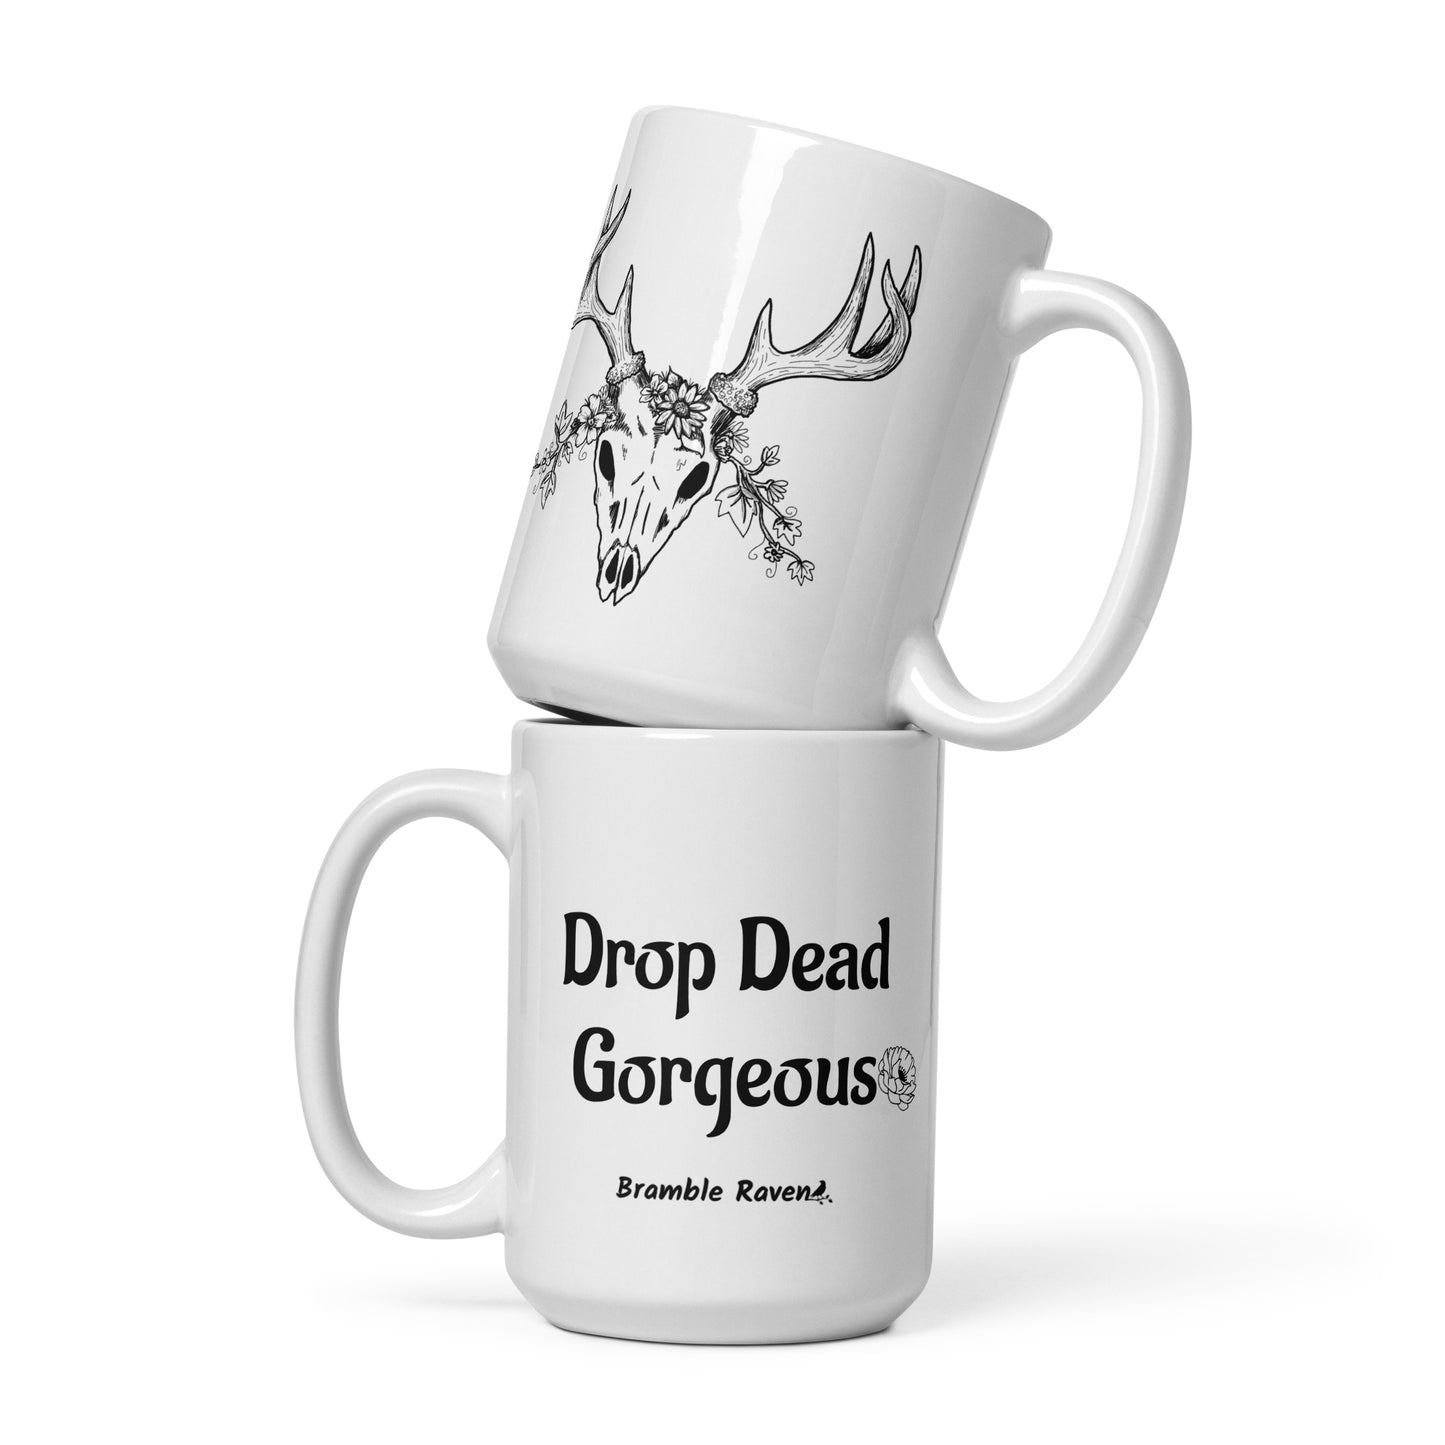 15 ounce white ceramic mug. Features illustrated deer skull wreathed in flowers on one side and Drop dead gorgeous text on the other side. Dishwasher and microwave safe.